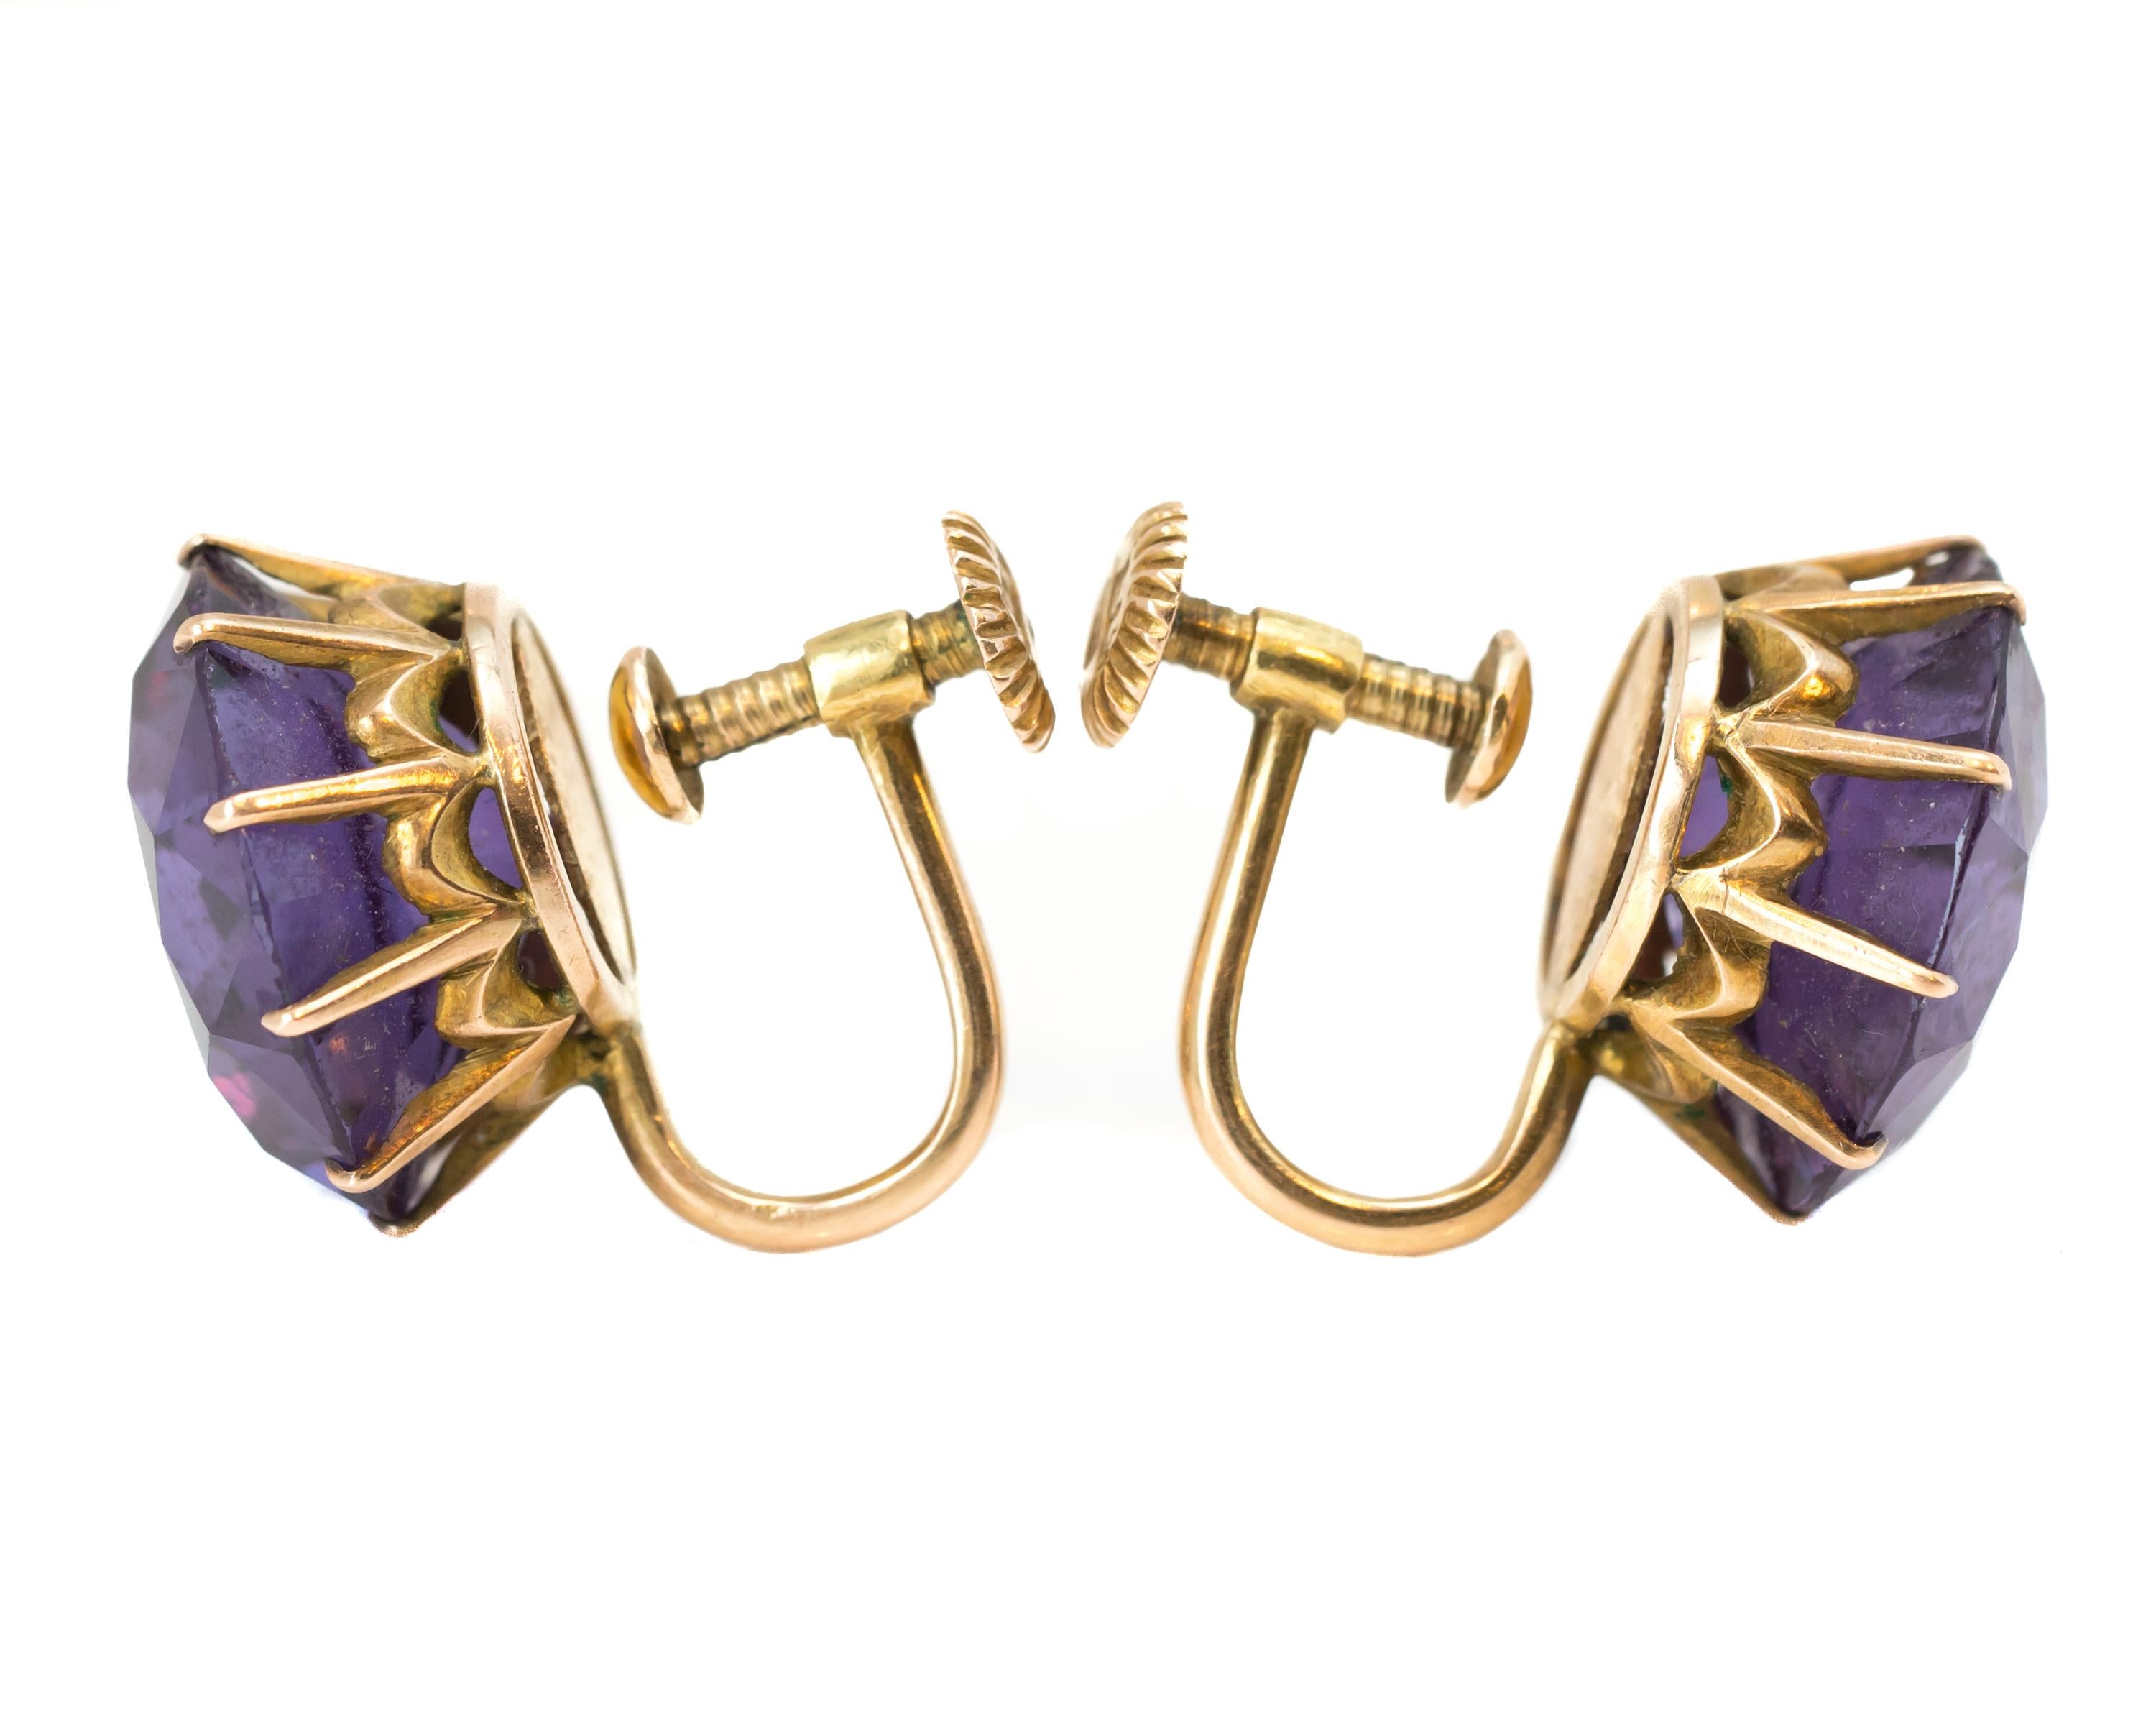 1920s Art Deco Round Synthetic Alexandrite Screw Back Clip On Earrings crafted in 14 karat Yellow Gold

Features:
Medium Purple Synthetic Alexandrite 
14 karat Yellow Gold Setting
Screw Back Clip On design
10-Prong Basket style Setting

Open setting